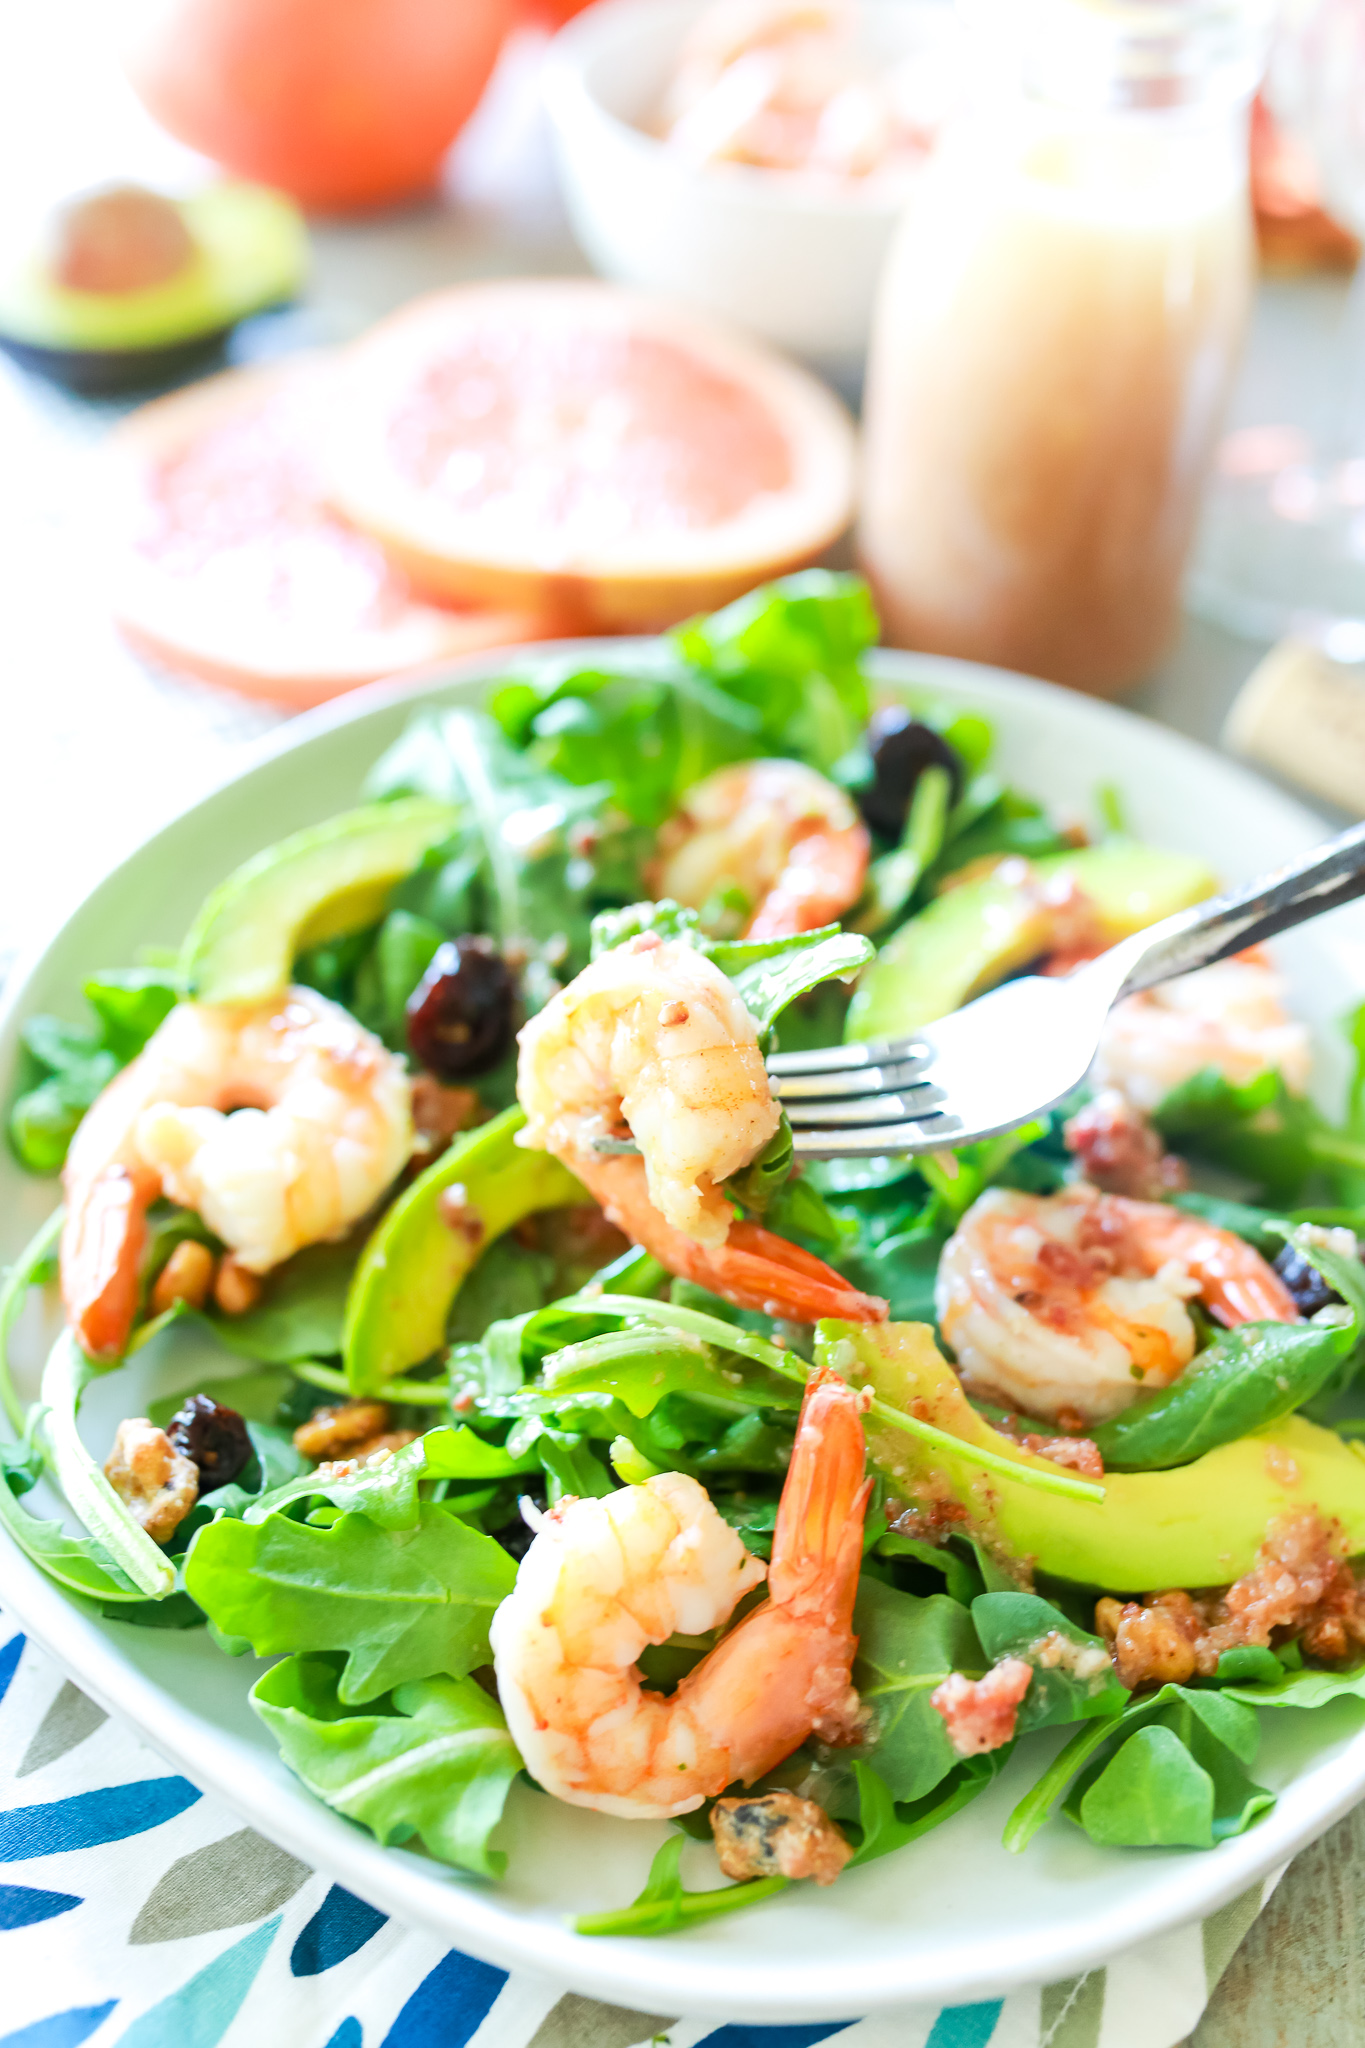 Spinach Salad with Hot Bacon Dressing Recipe Taste of Home